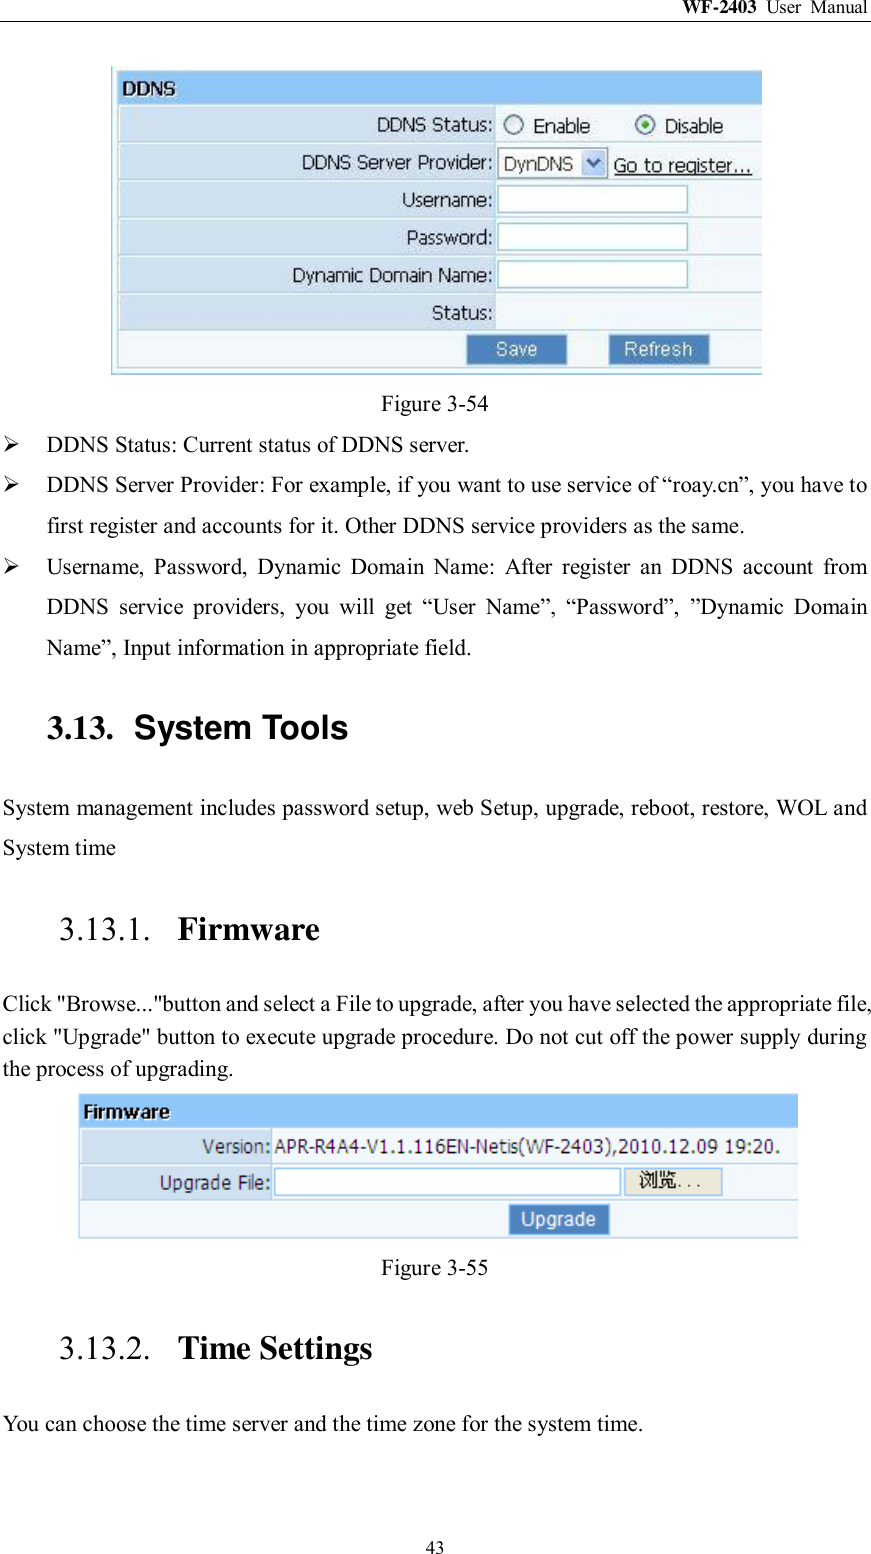 WF-2403  User  Manual  43  Figure 3-54  DDNS Status: Current status of DDNS server.  DDNS Server Provider: For example, if you want to use service of “roay.cn”, you have to first register and accounts for it. Other DDNS service providers as the same.  Username,  Password,  Dynamic  Domain  Name:  After  register  an  DDNS  account  from DDNS  service  providers,  you  will  get  “User  Name”,  “Password”,  ”Dynamic  Domain Name”, Input information in appropriate field. 3.13.  System Tools System management includes password setup, web Setup, upgrade, reboot, restore, WOL and System time 3.13.1. Firmware Click &quot;Browse...&quot;button and select a File to upgrade, after you have selected the appropriate file, click &quot;Upgrade&quot; button to execute upgrade procedure. Do not cut off the power supply during the process of upgrading.  Figure 3-55 3.13.2. Time Settings You can choose the time server and the time zone for the system time. 